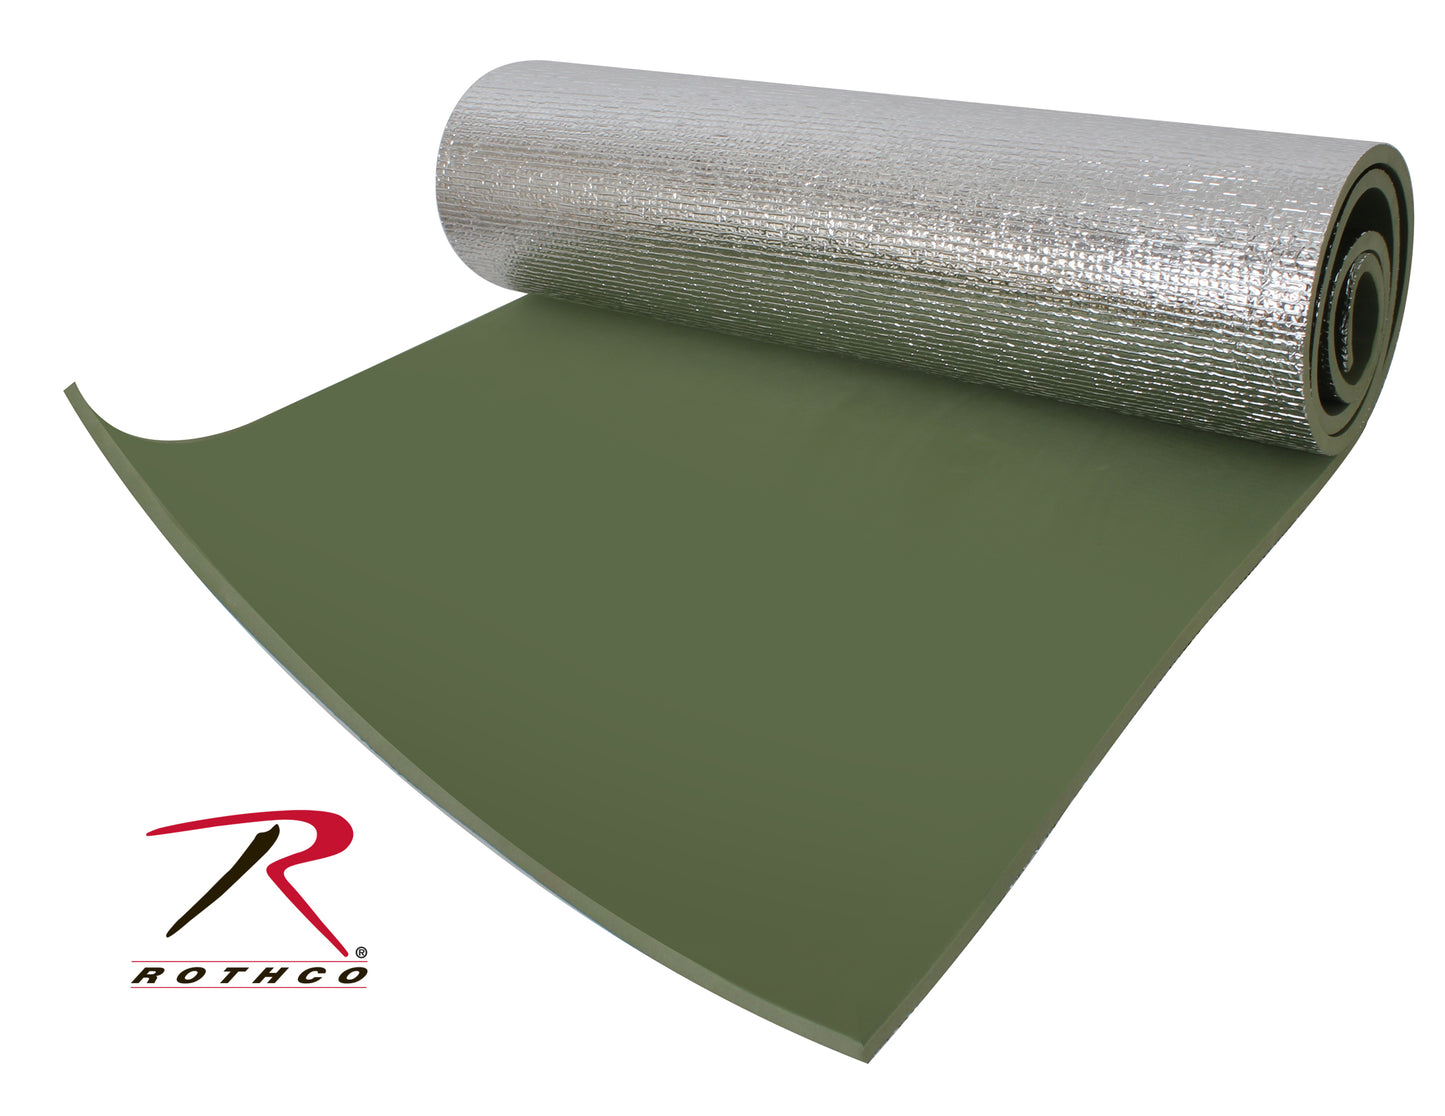 Milspec Thermal Reflective Sleeping Pad with Ties - Olive Drab Blankets & Sleeping Bags MilTac Tactical Military Outdoor Gear Australia